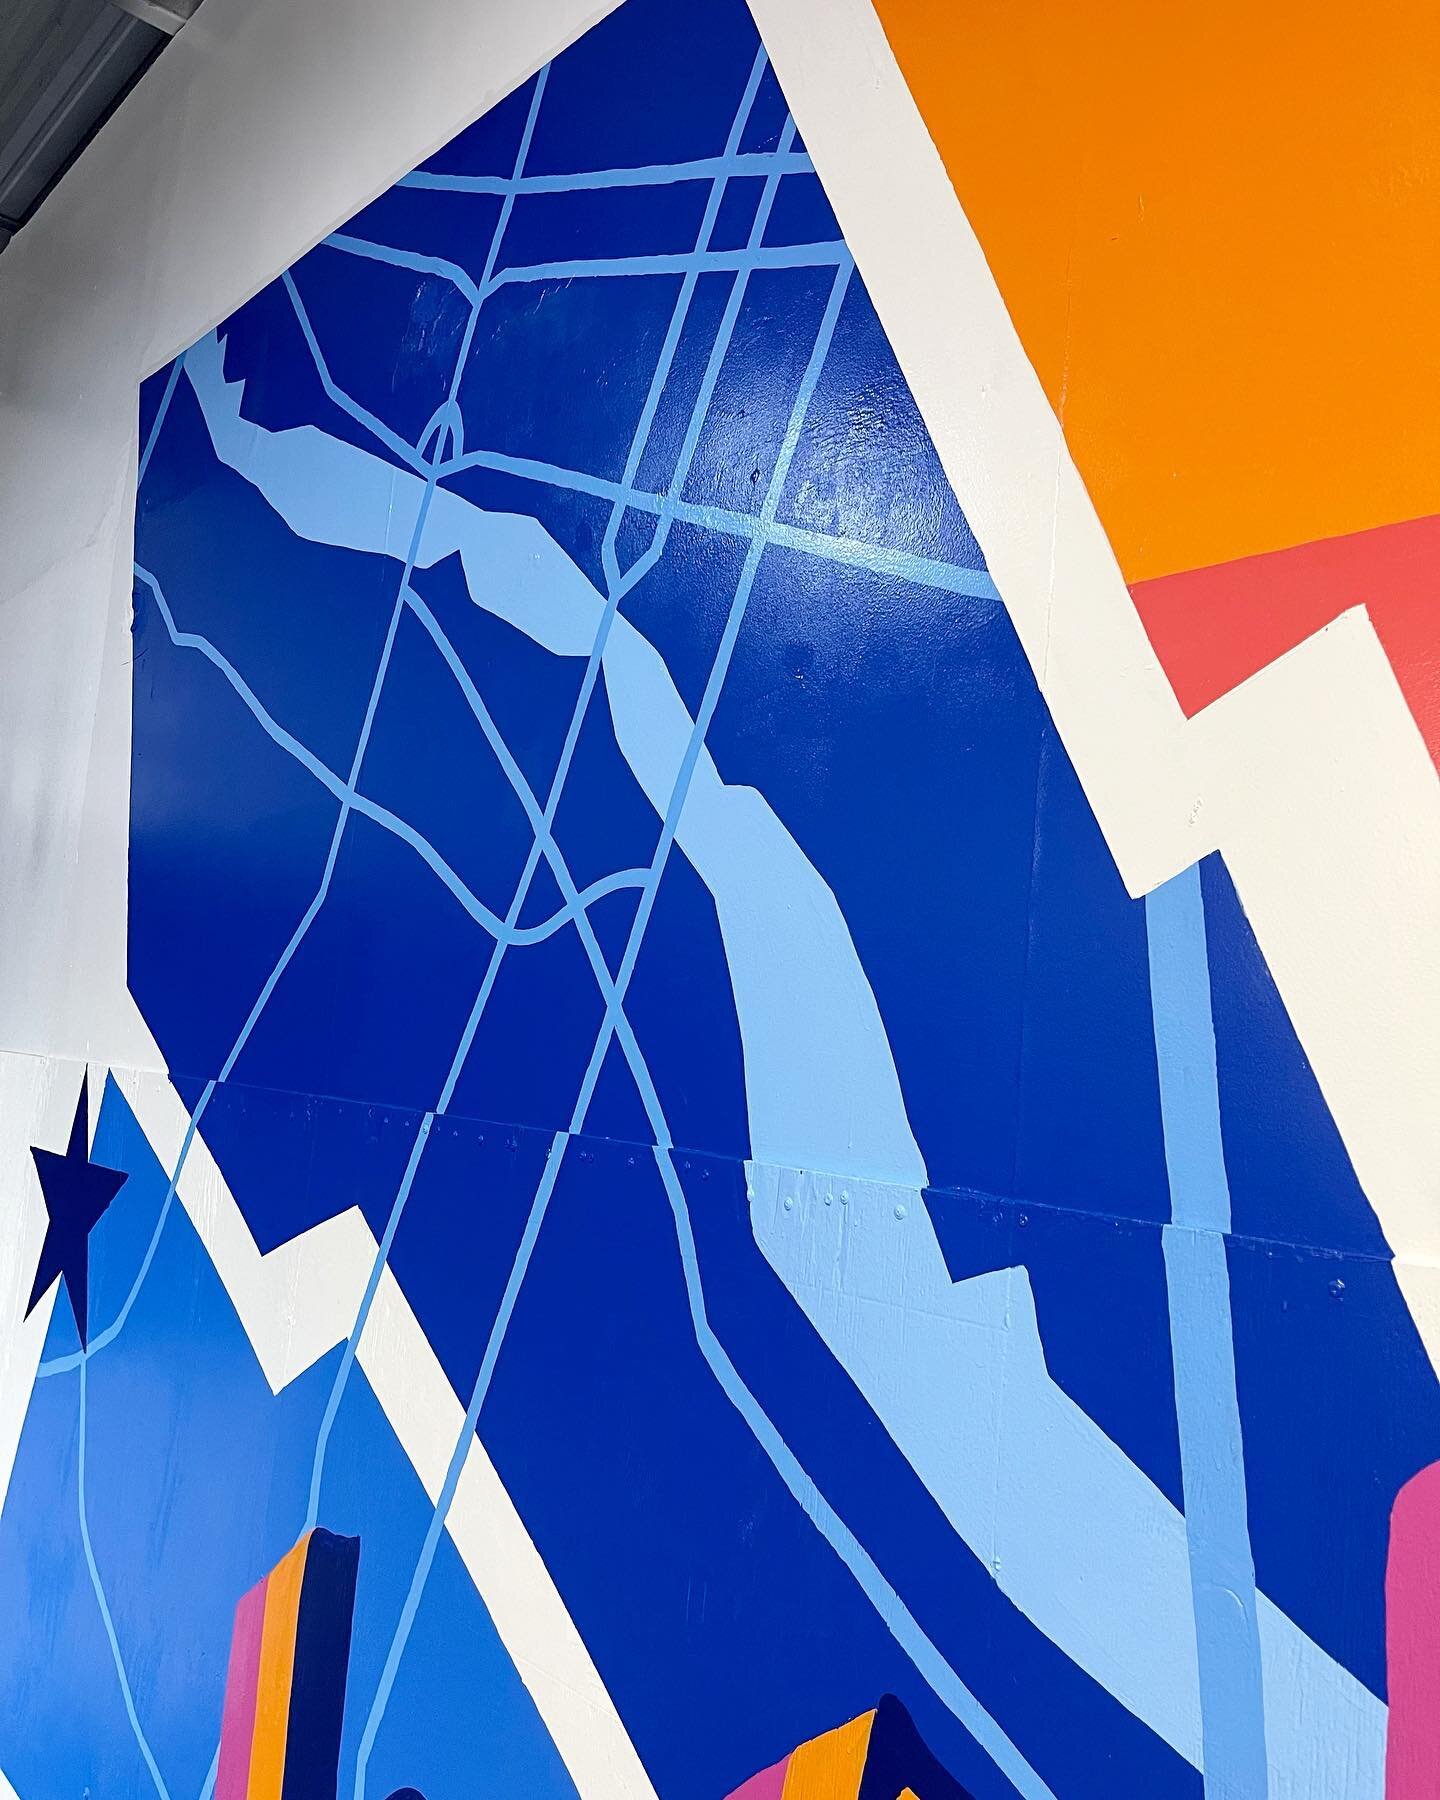 looking good Austin 👀📍

this mural install included a map of downtown Austin, TX! the star represents the location of the CrossFit gym @solacrossfit on South Lamar! 

now for the real question: can you read the map?! 

#atx #austin #austintexas #te